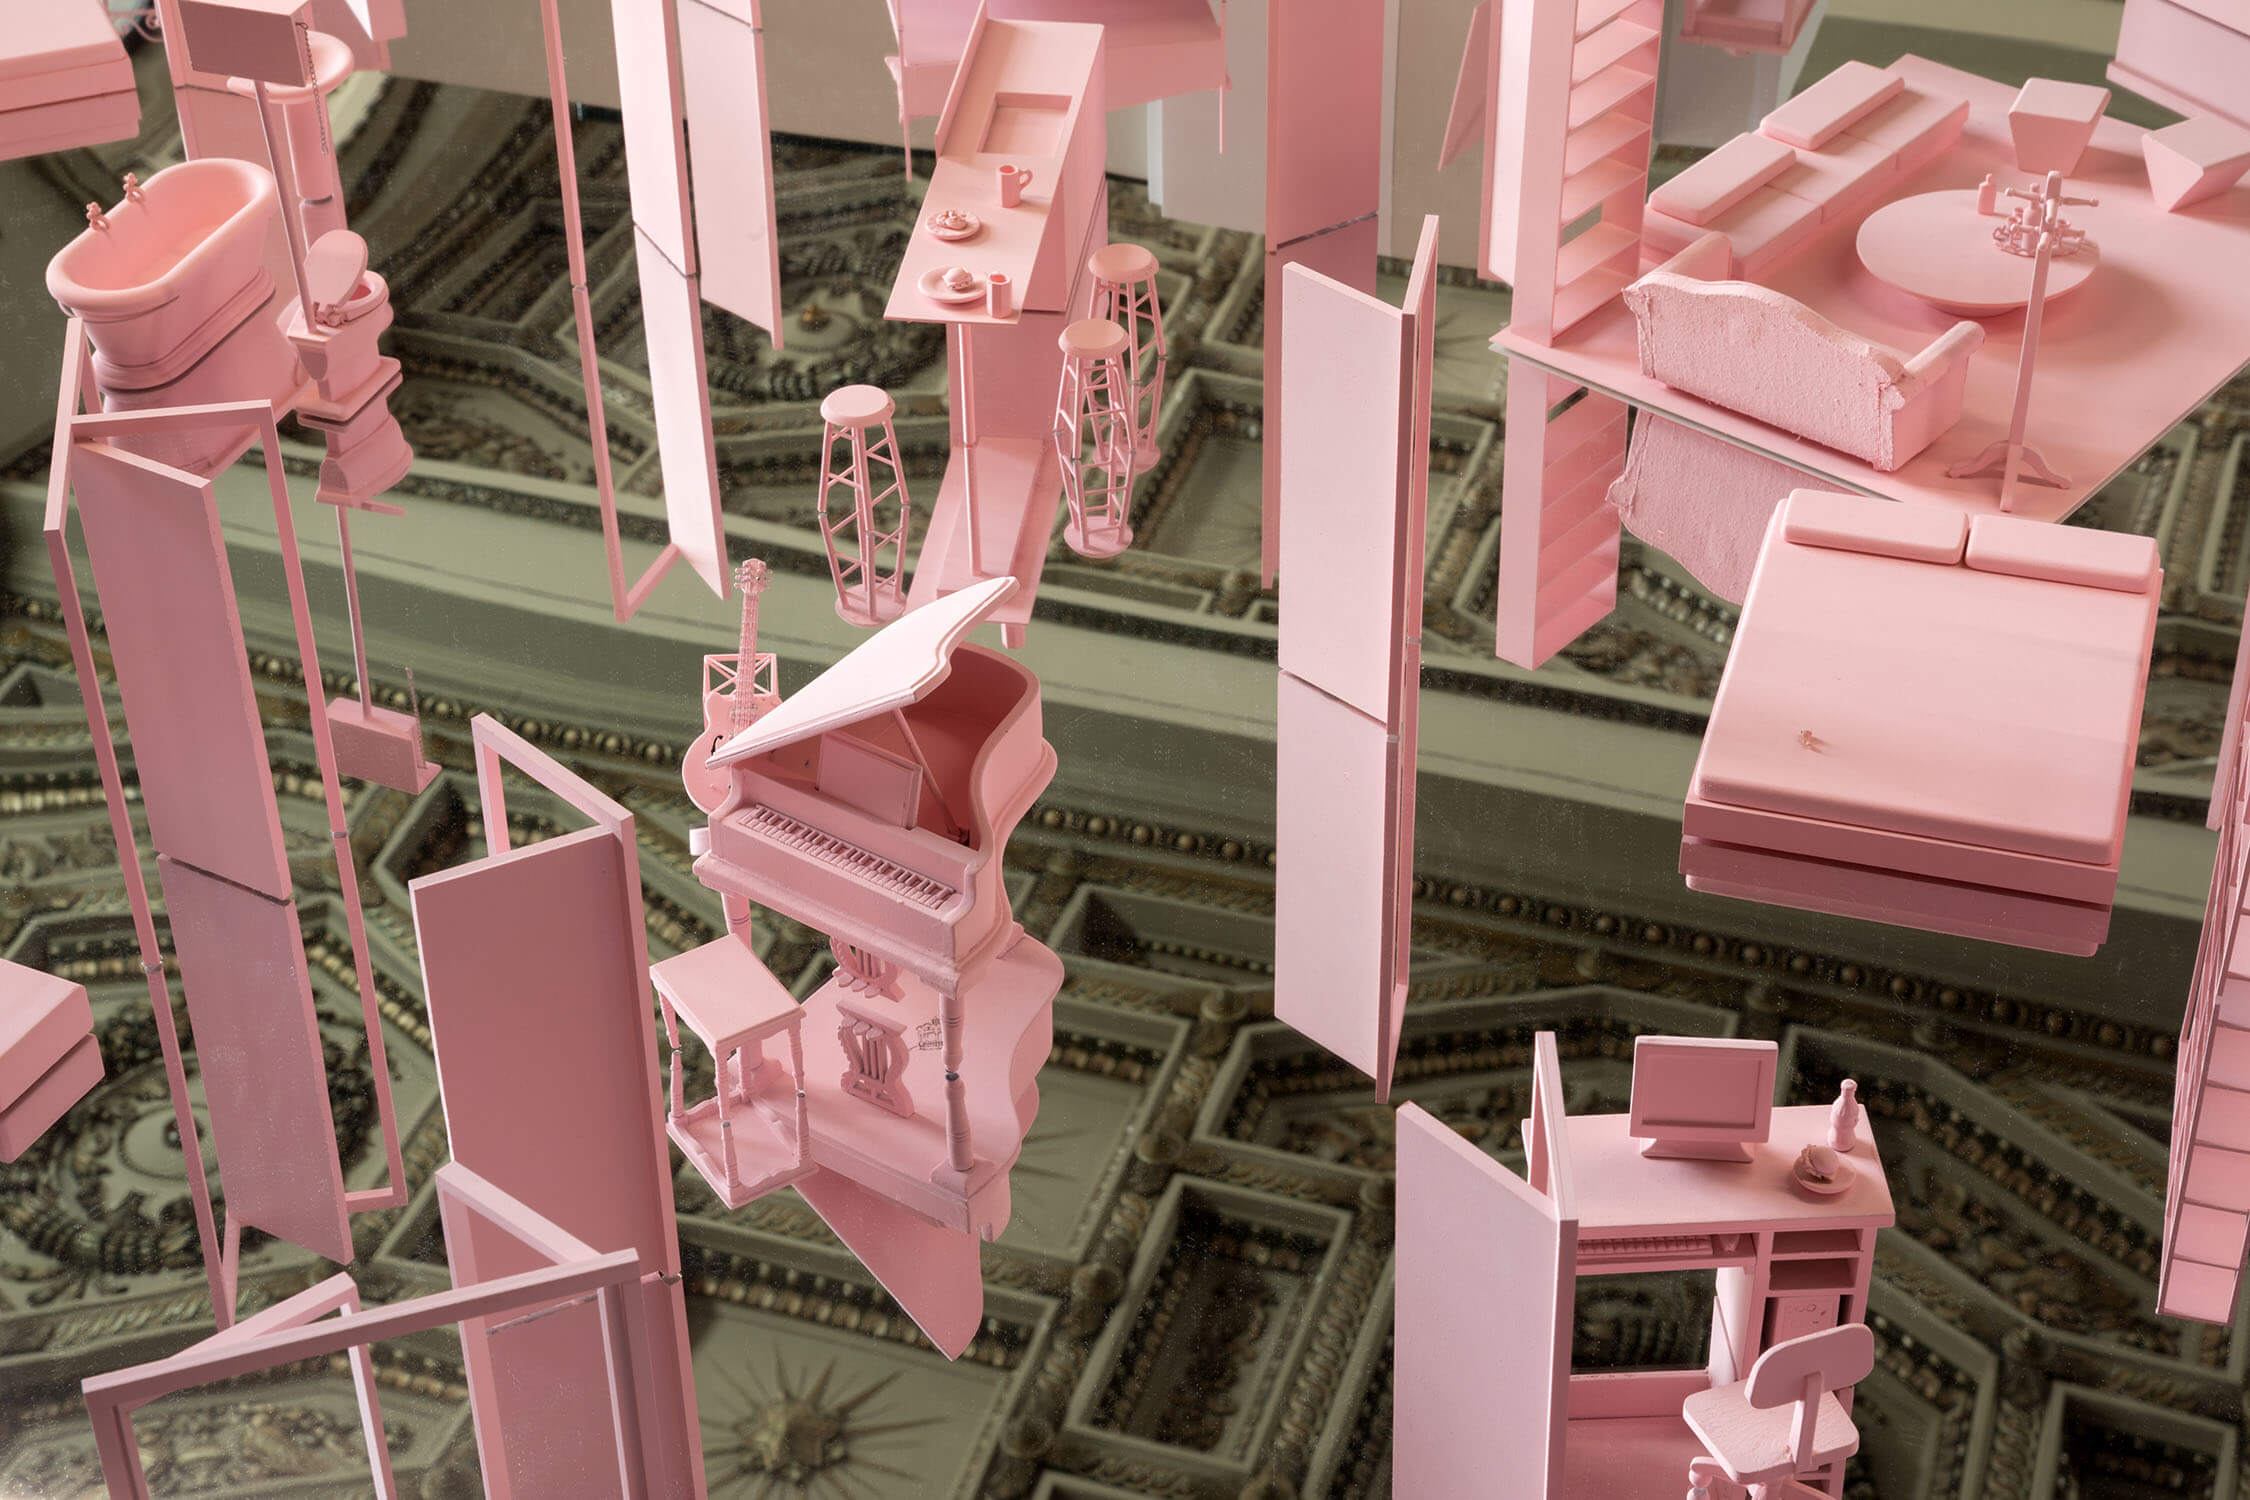 suspended models of pink-pained home furnishings